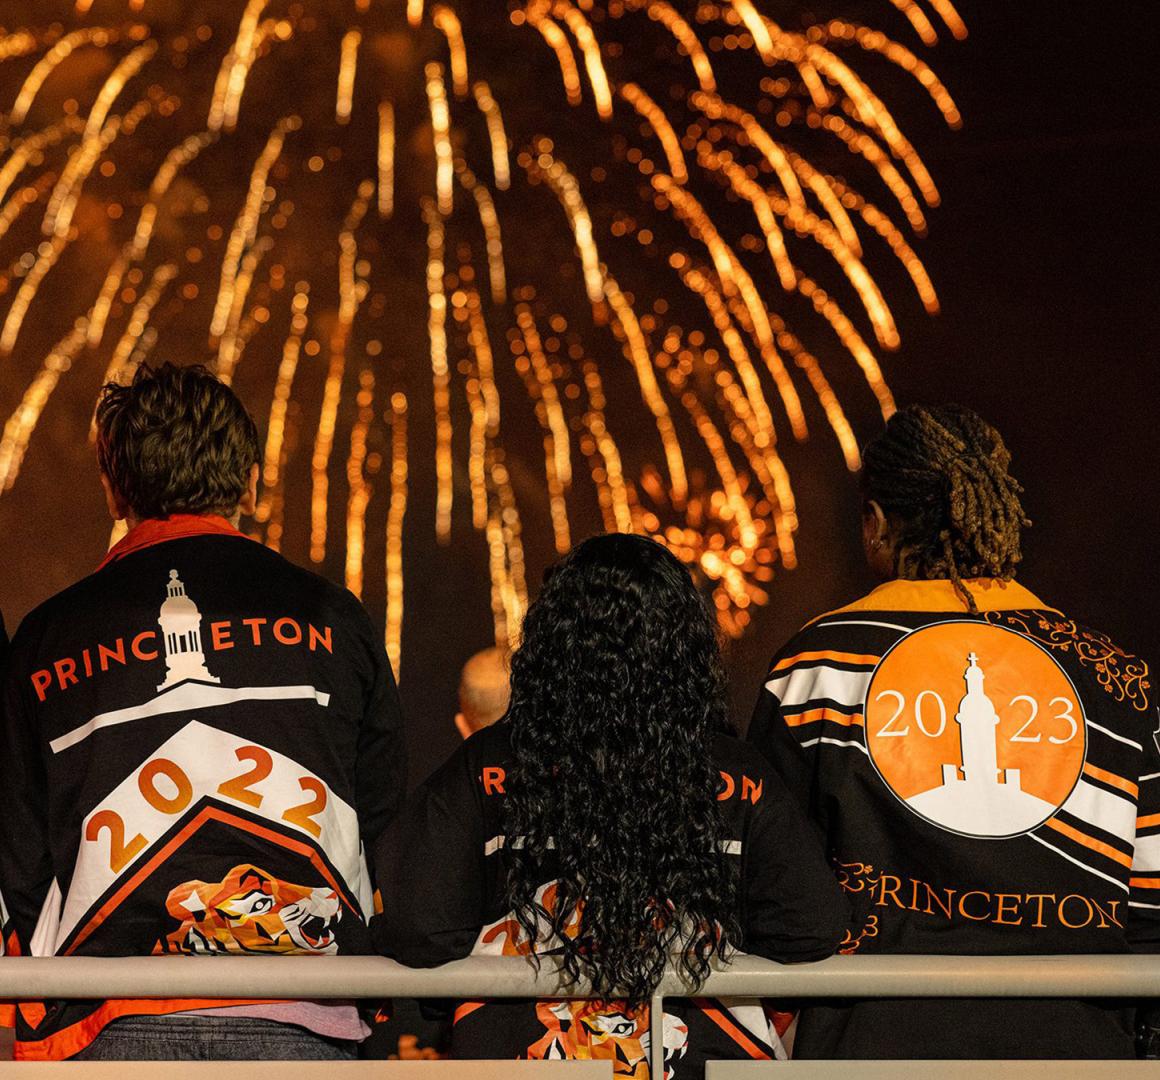 Fireworks explode in the Princeton sky following Reunions